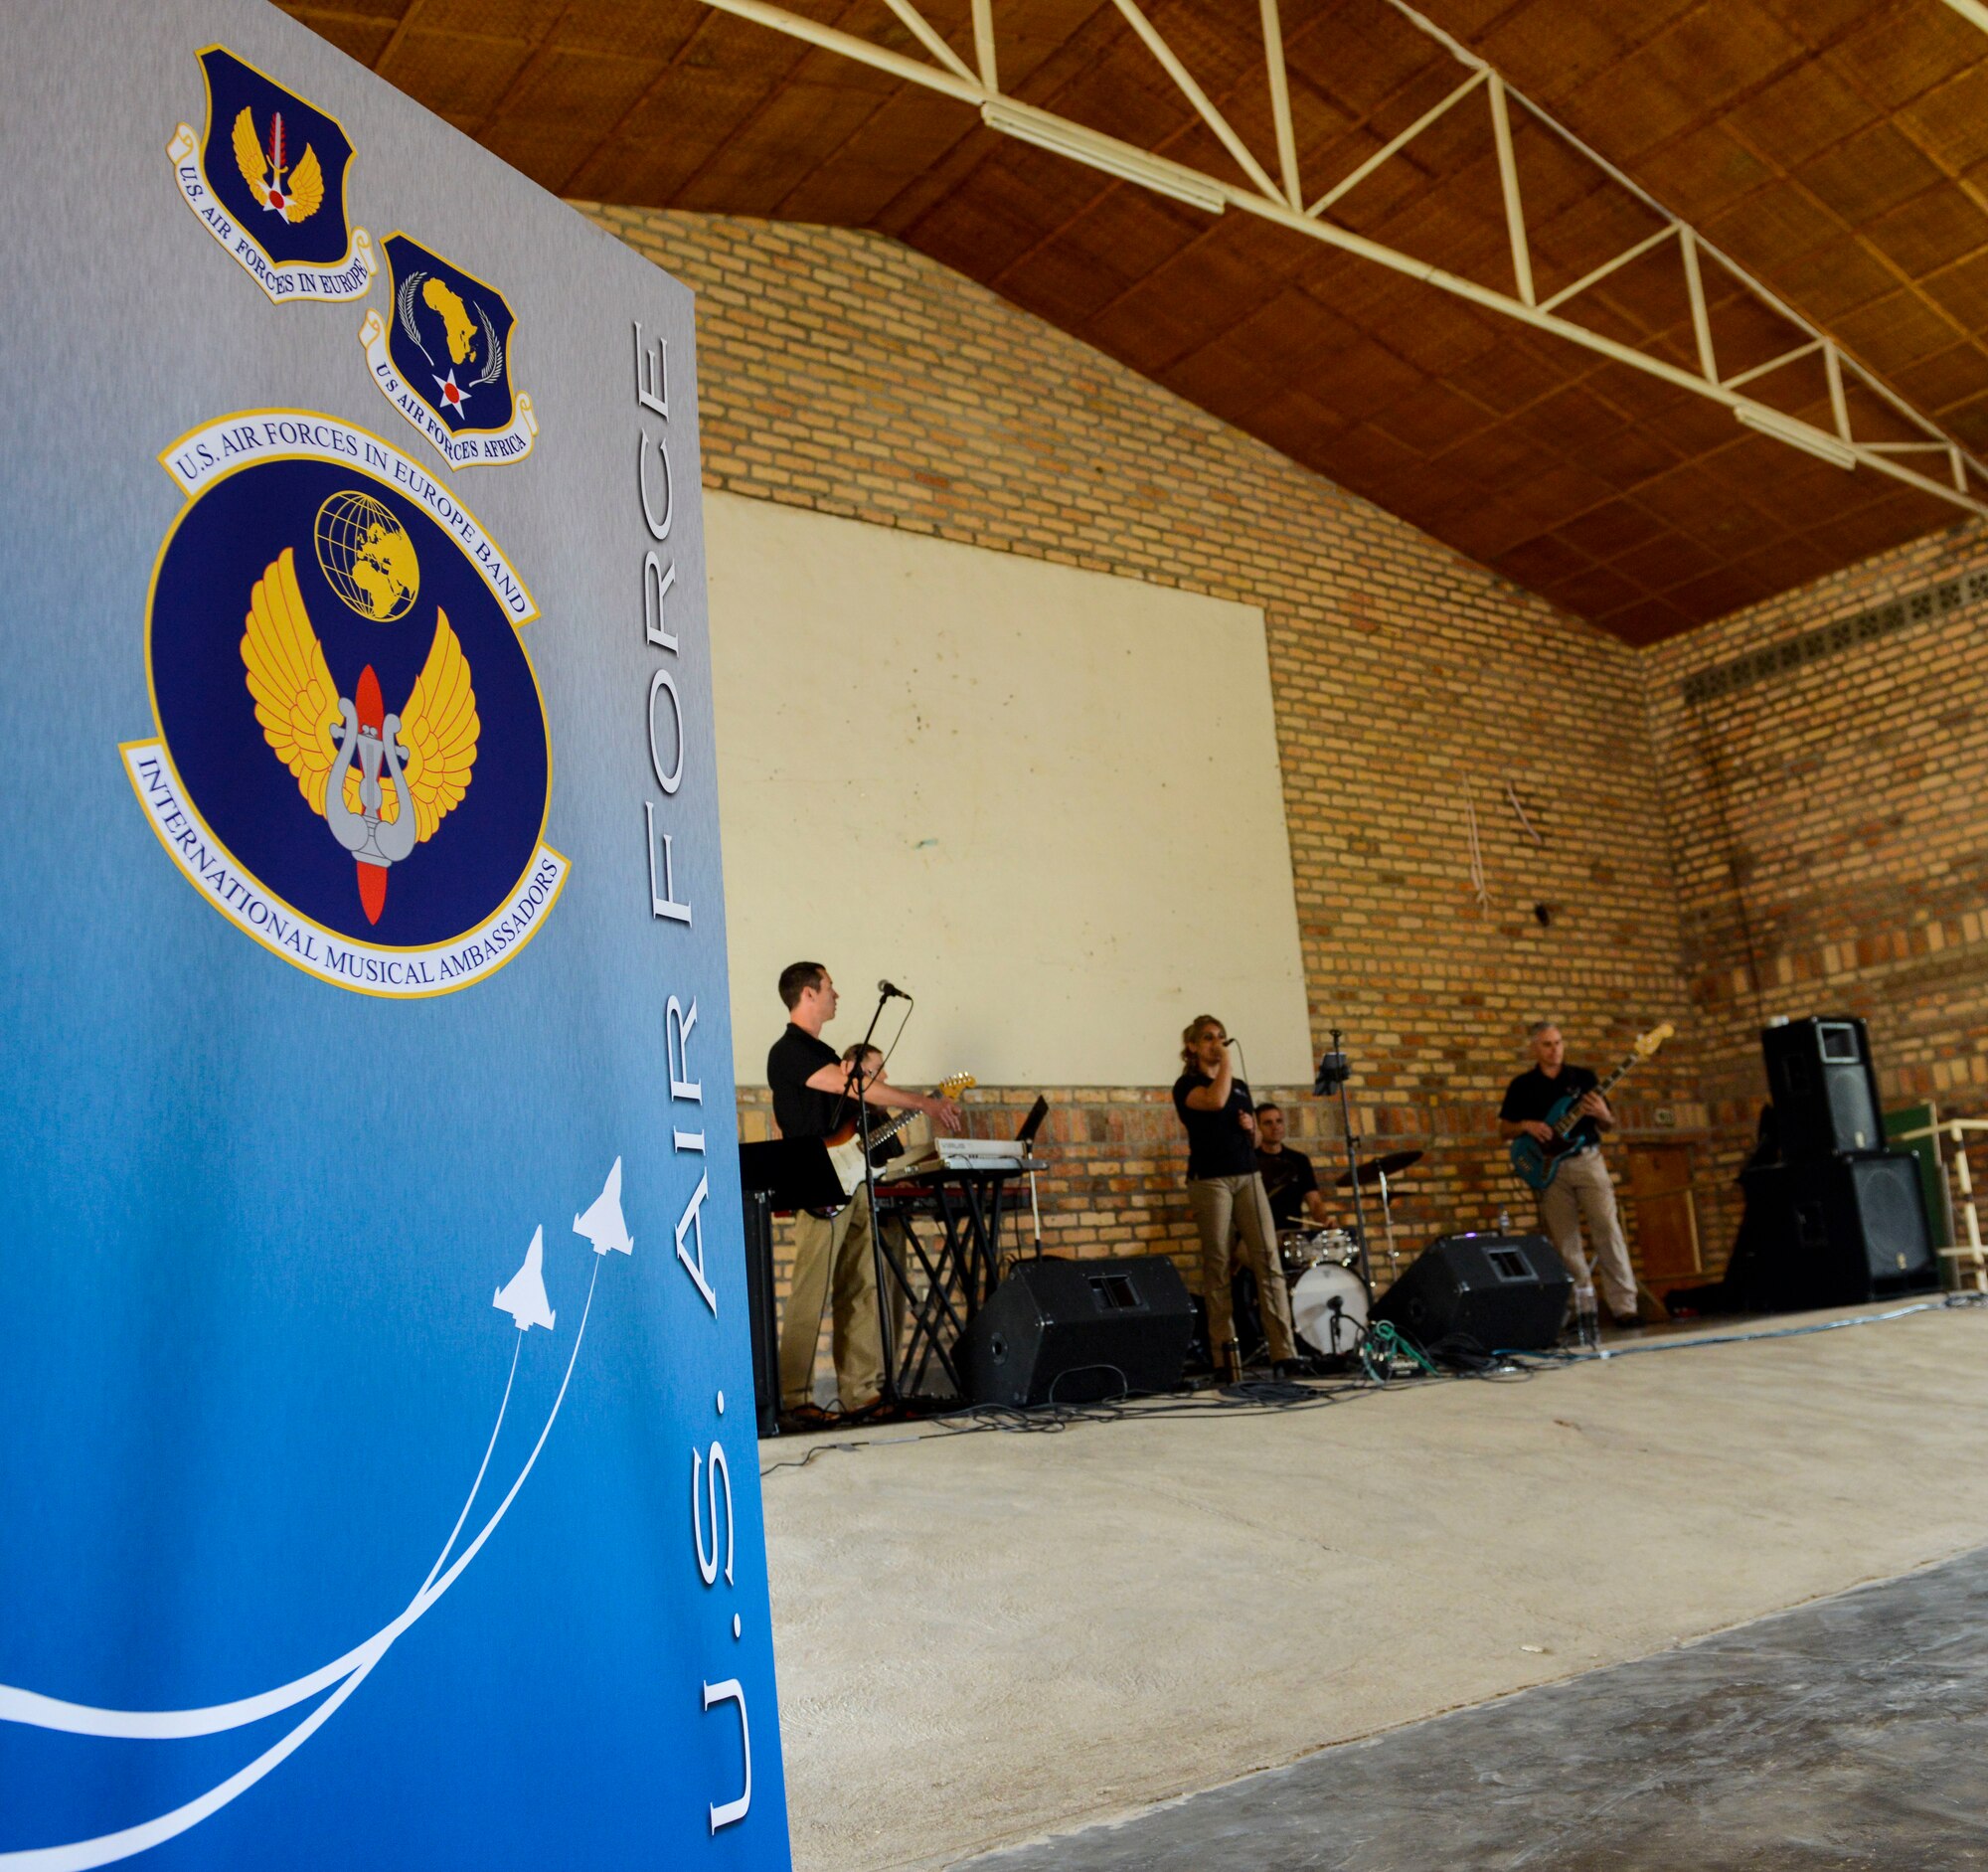 U.S. Airmen assigned to the U.S. Air Forces in Europe Band Touch N' Go perform sound checks at the Home de la vierge des Pauvres Gatagara/Nyanza in the Nyanza District, Rwanda, March 5, 2019. The USAFE Band played for HVP Nyanza as part of an outreach event. The band uses these events to further increase cultural ties and enhance the people-to-people relationship between the United States and its partners such as Rwanda. (U.S. Air Forces photo by Tech. Sgt. Timothy Moore)